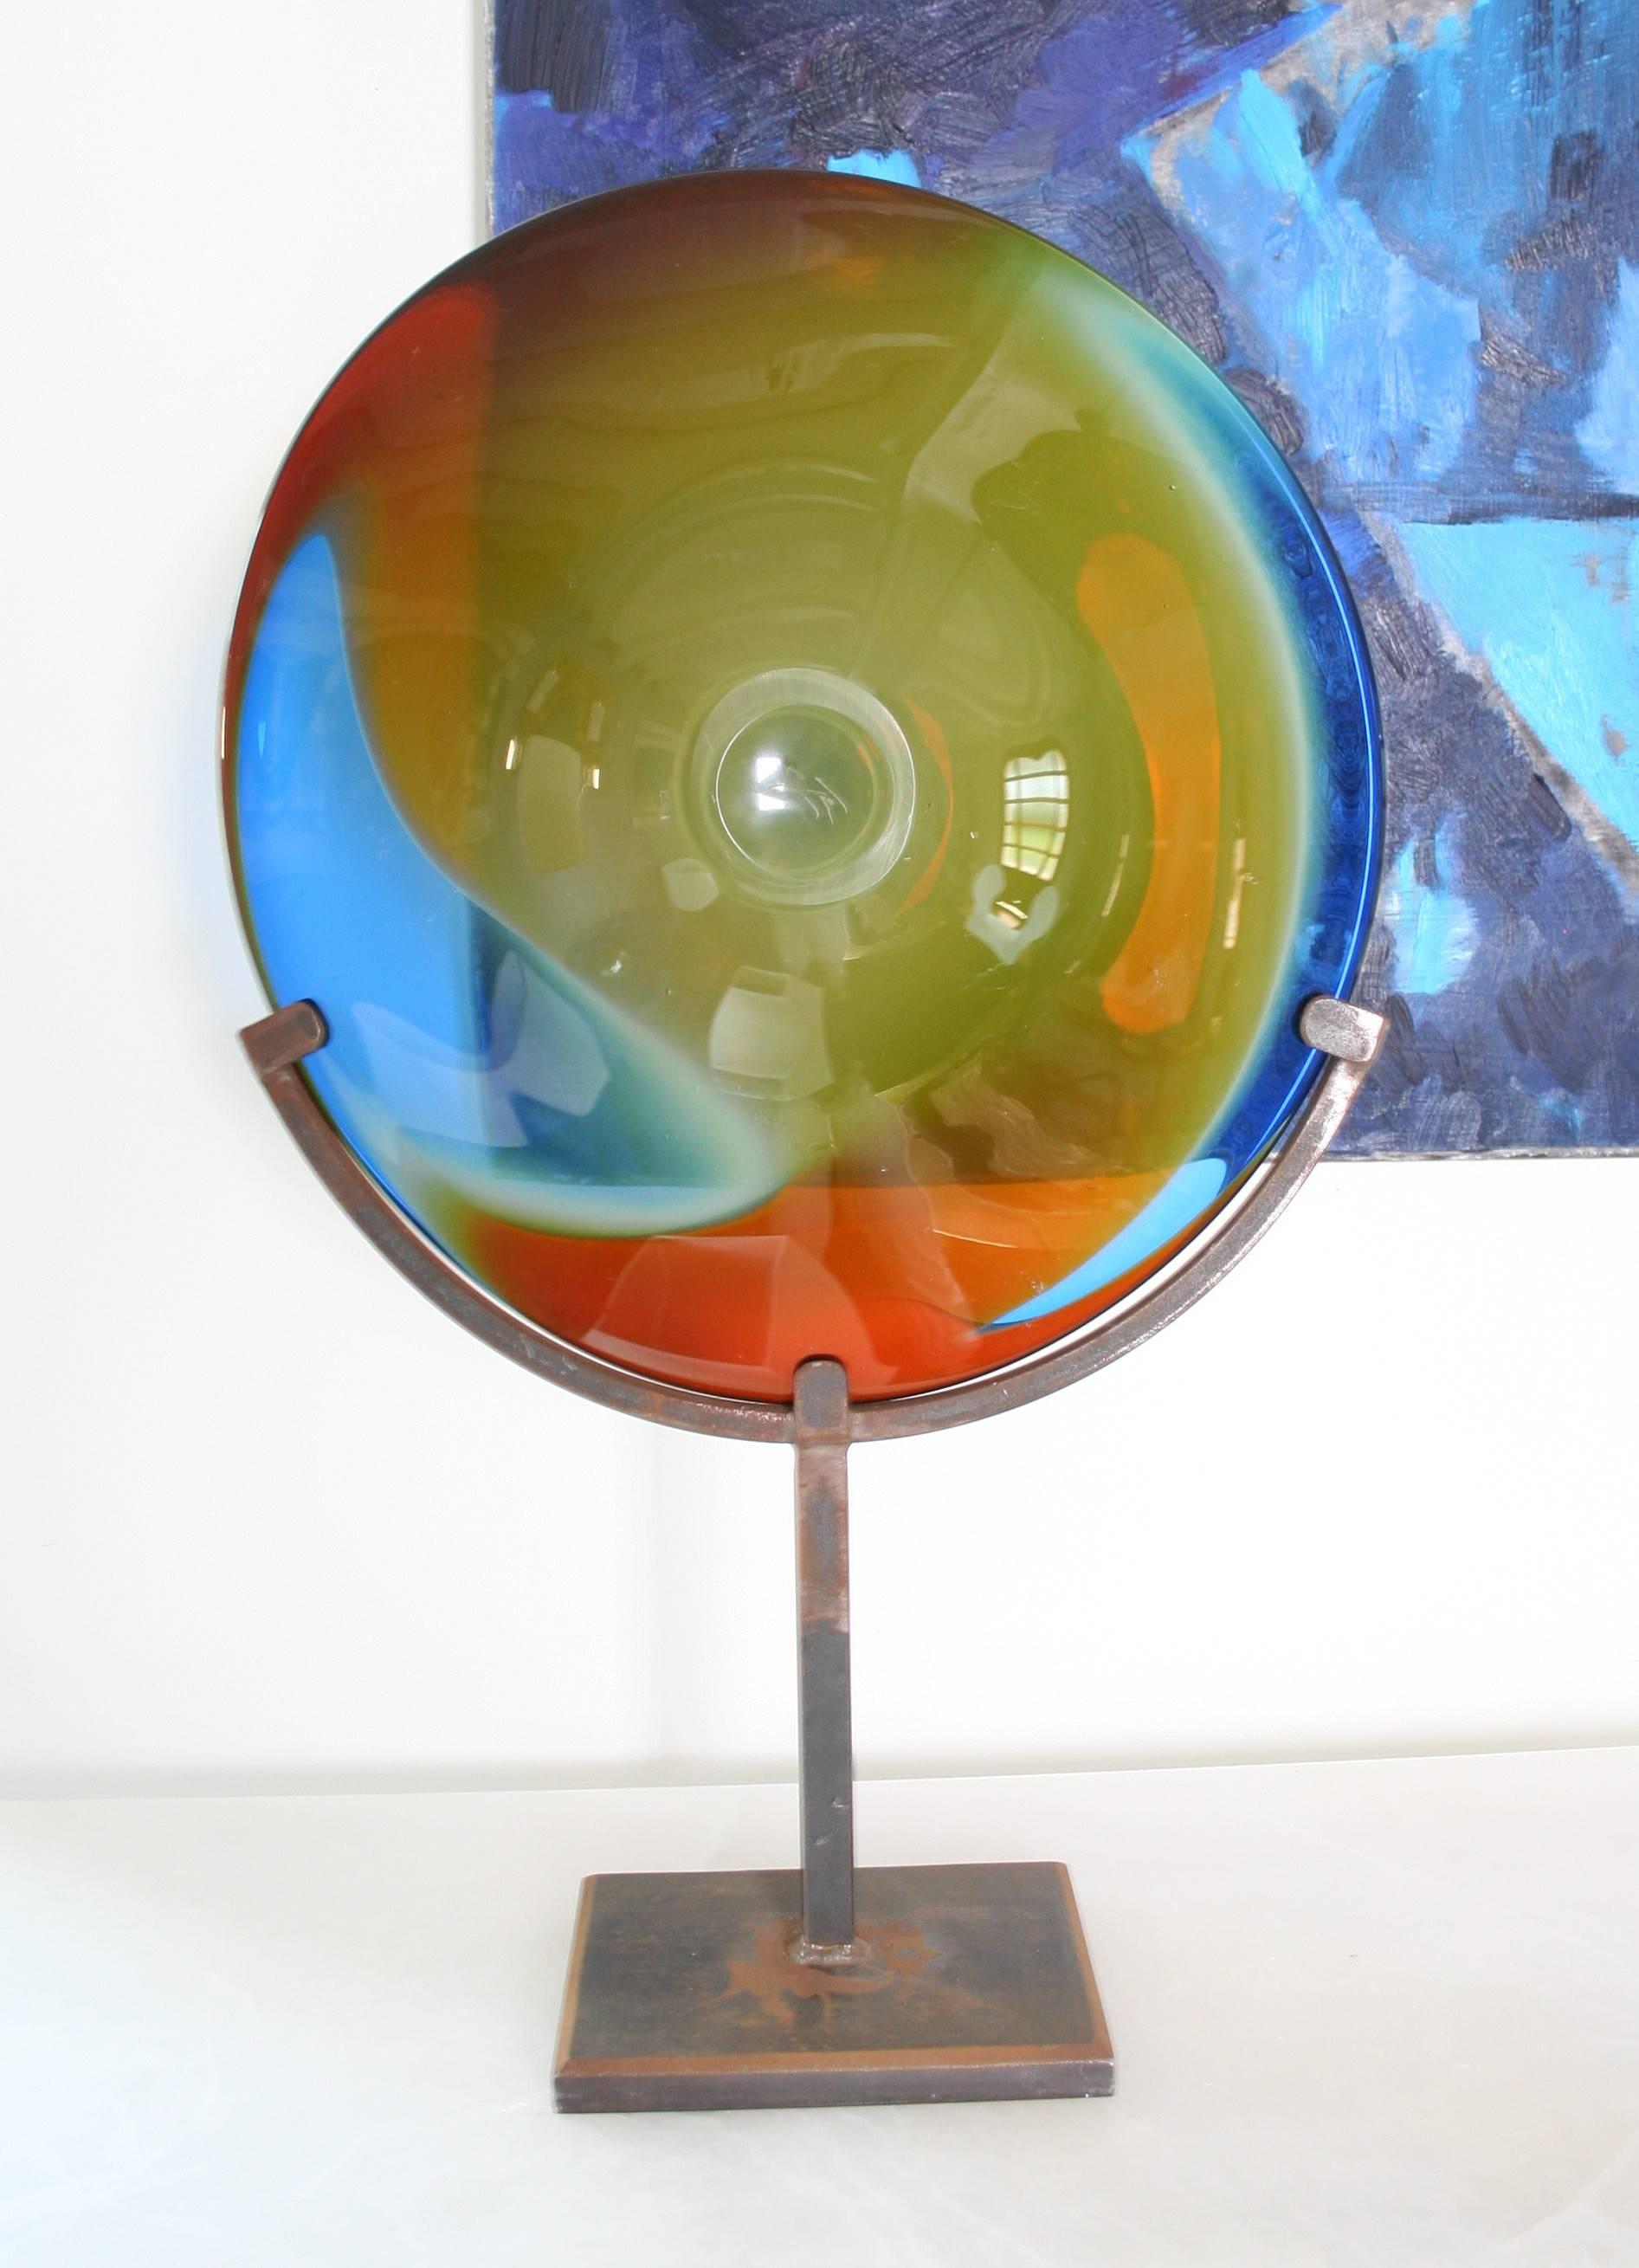 Unique great sculpture Solem in handcrafted glass.
Size: 42 cm width x 67 cm high. (diameter 42 cm)
Realized in France - signed by Jahn Noeil - Glassmaker artist
leg in steel.
 